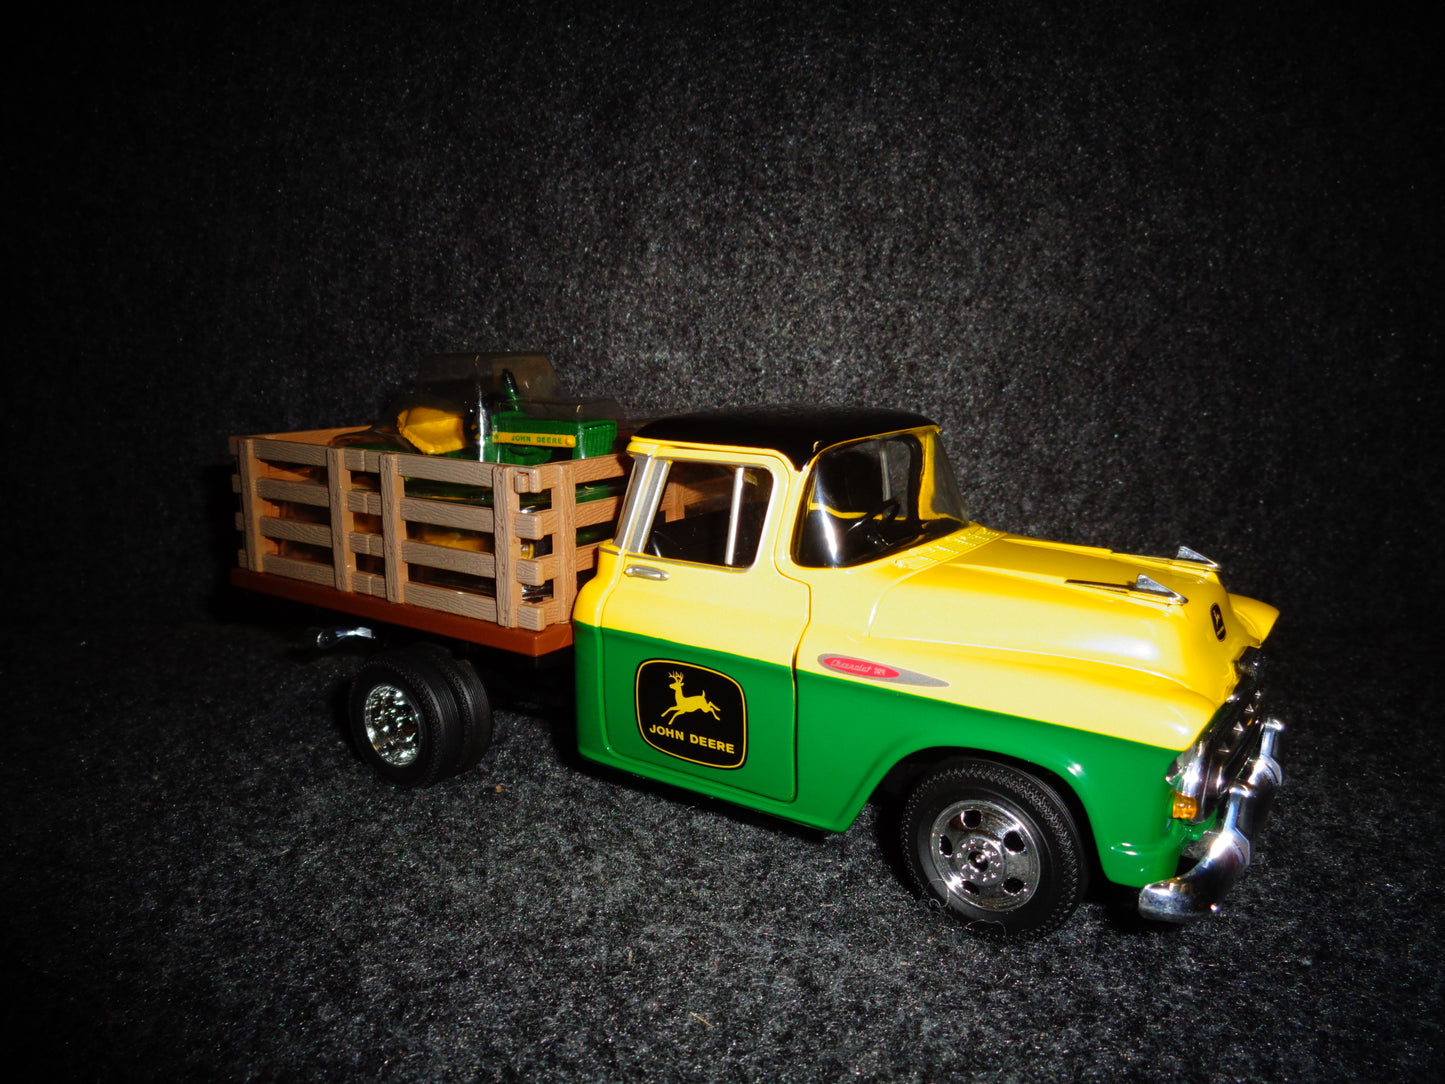 John Deere 1957 Chevrolet Stake Truck with Riding Lawnmower